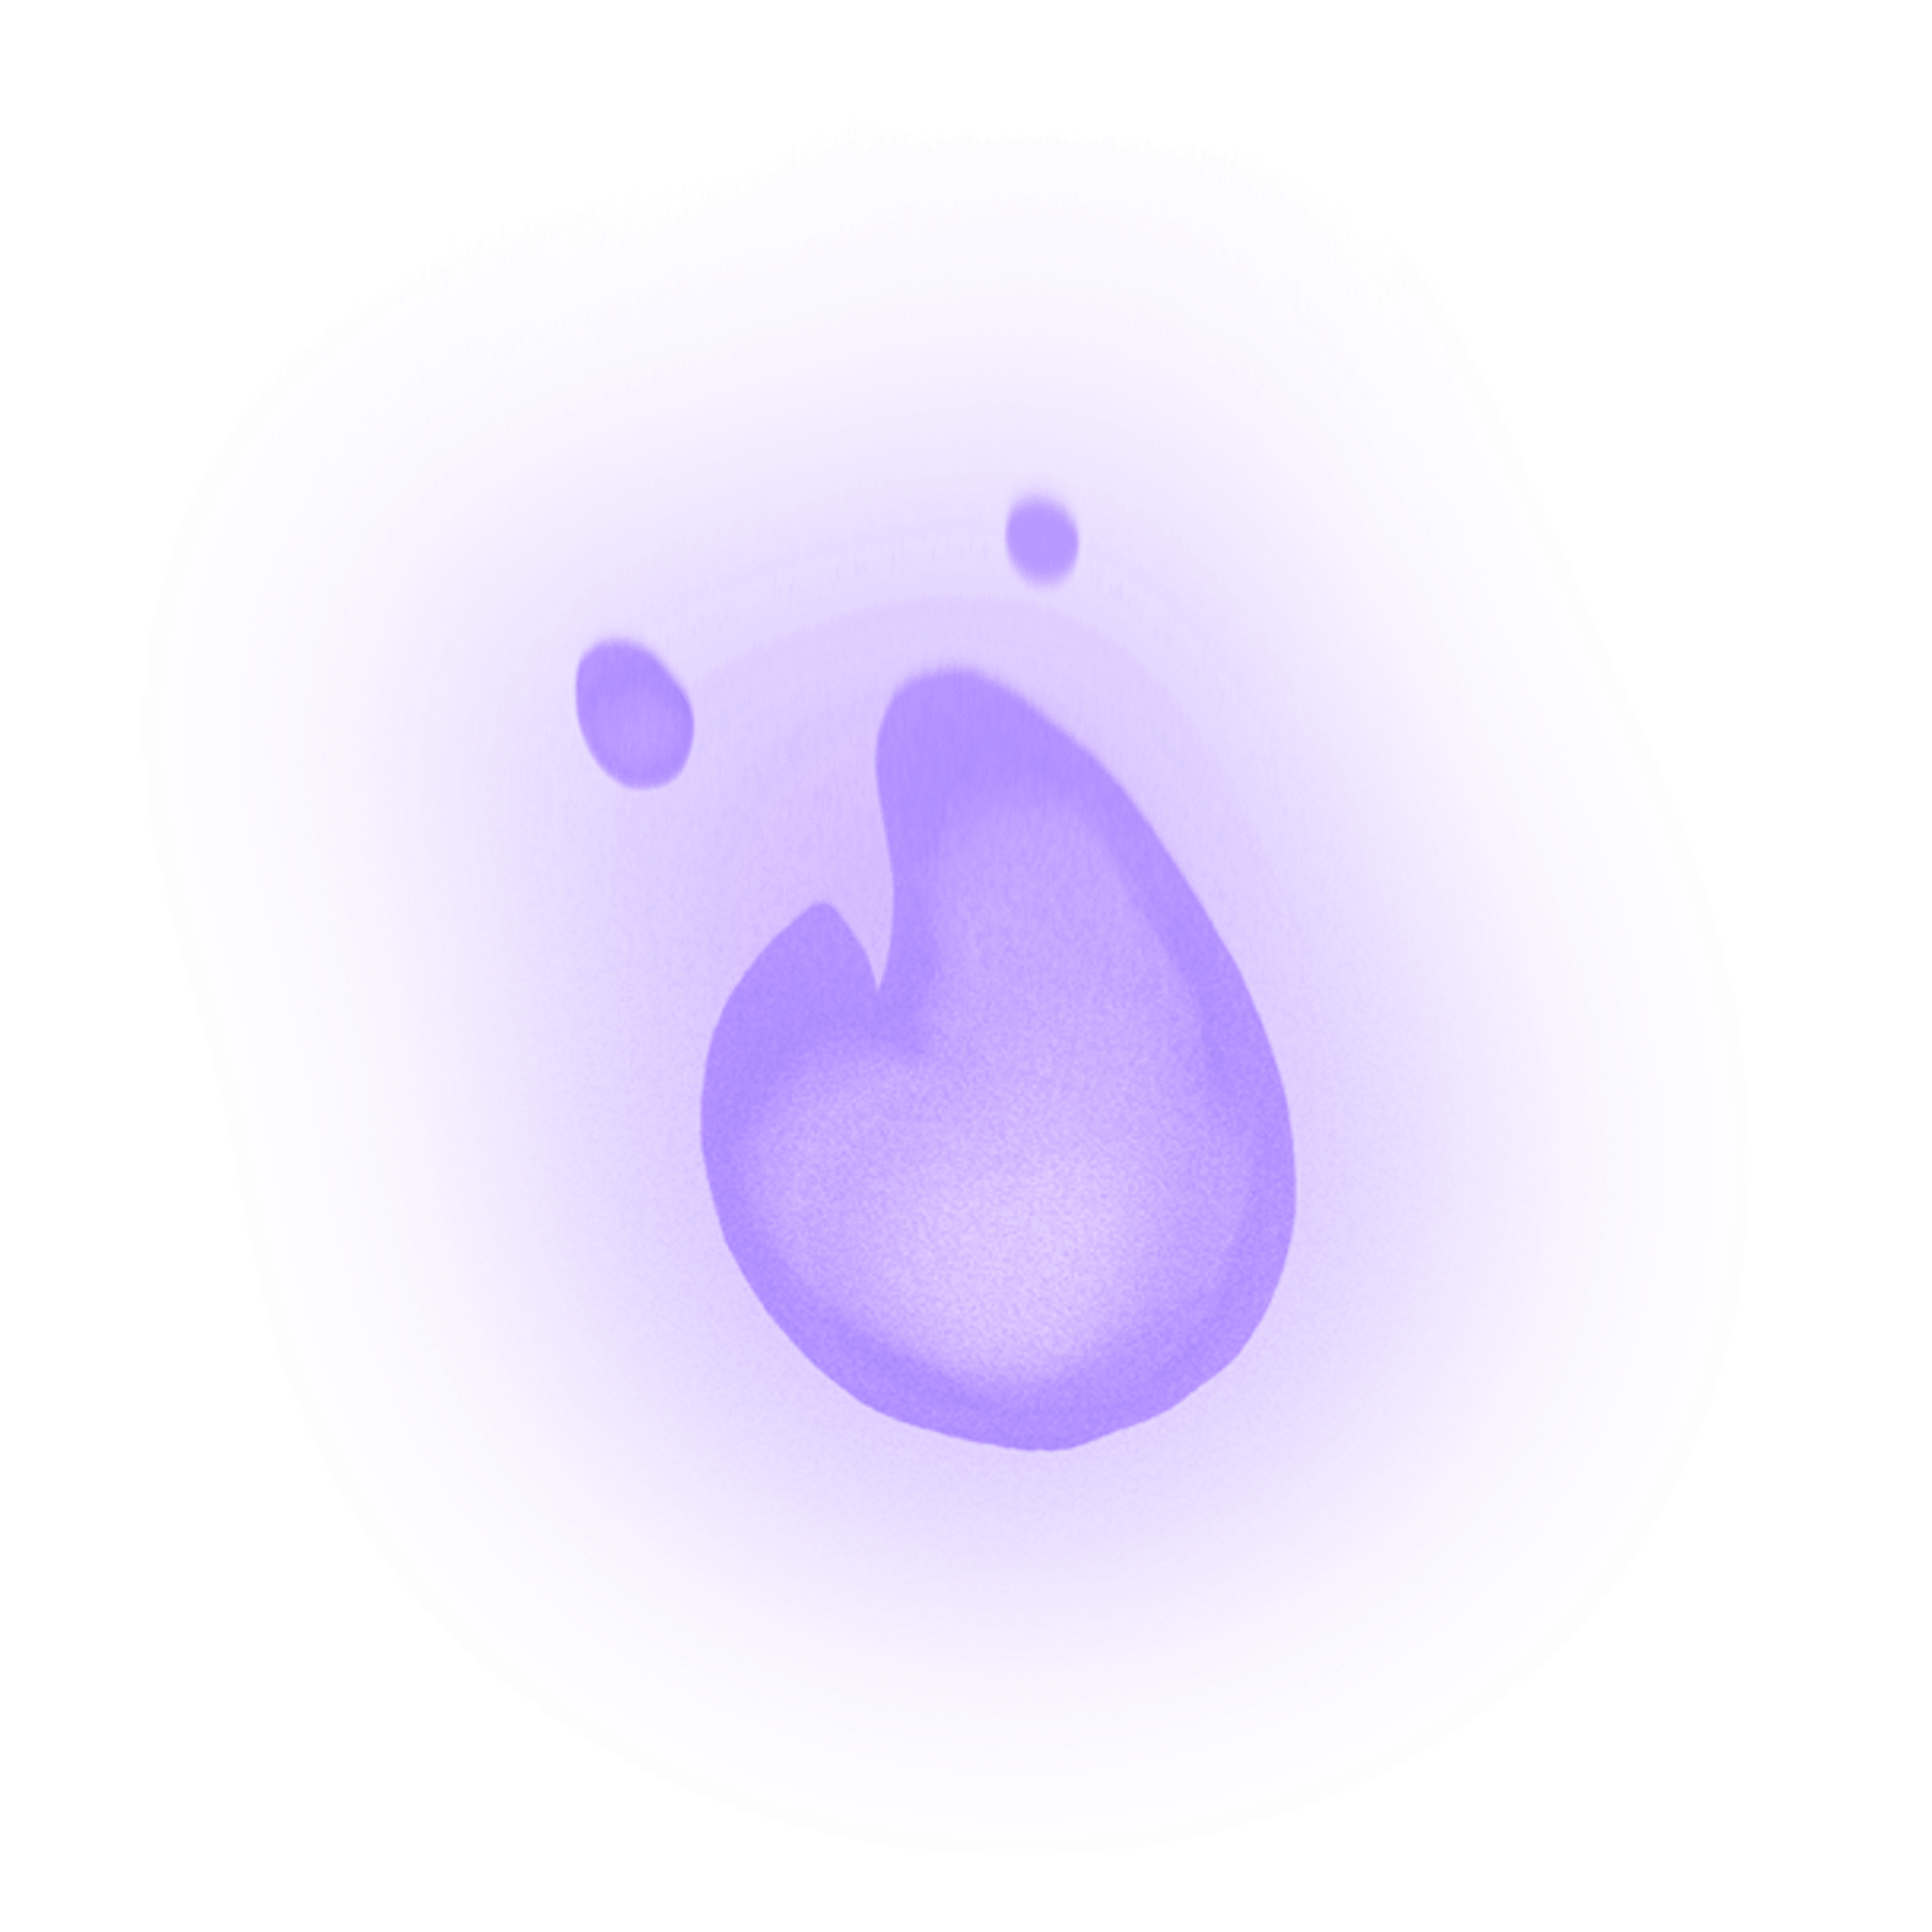 The Purple Flame asset